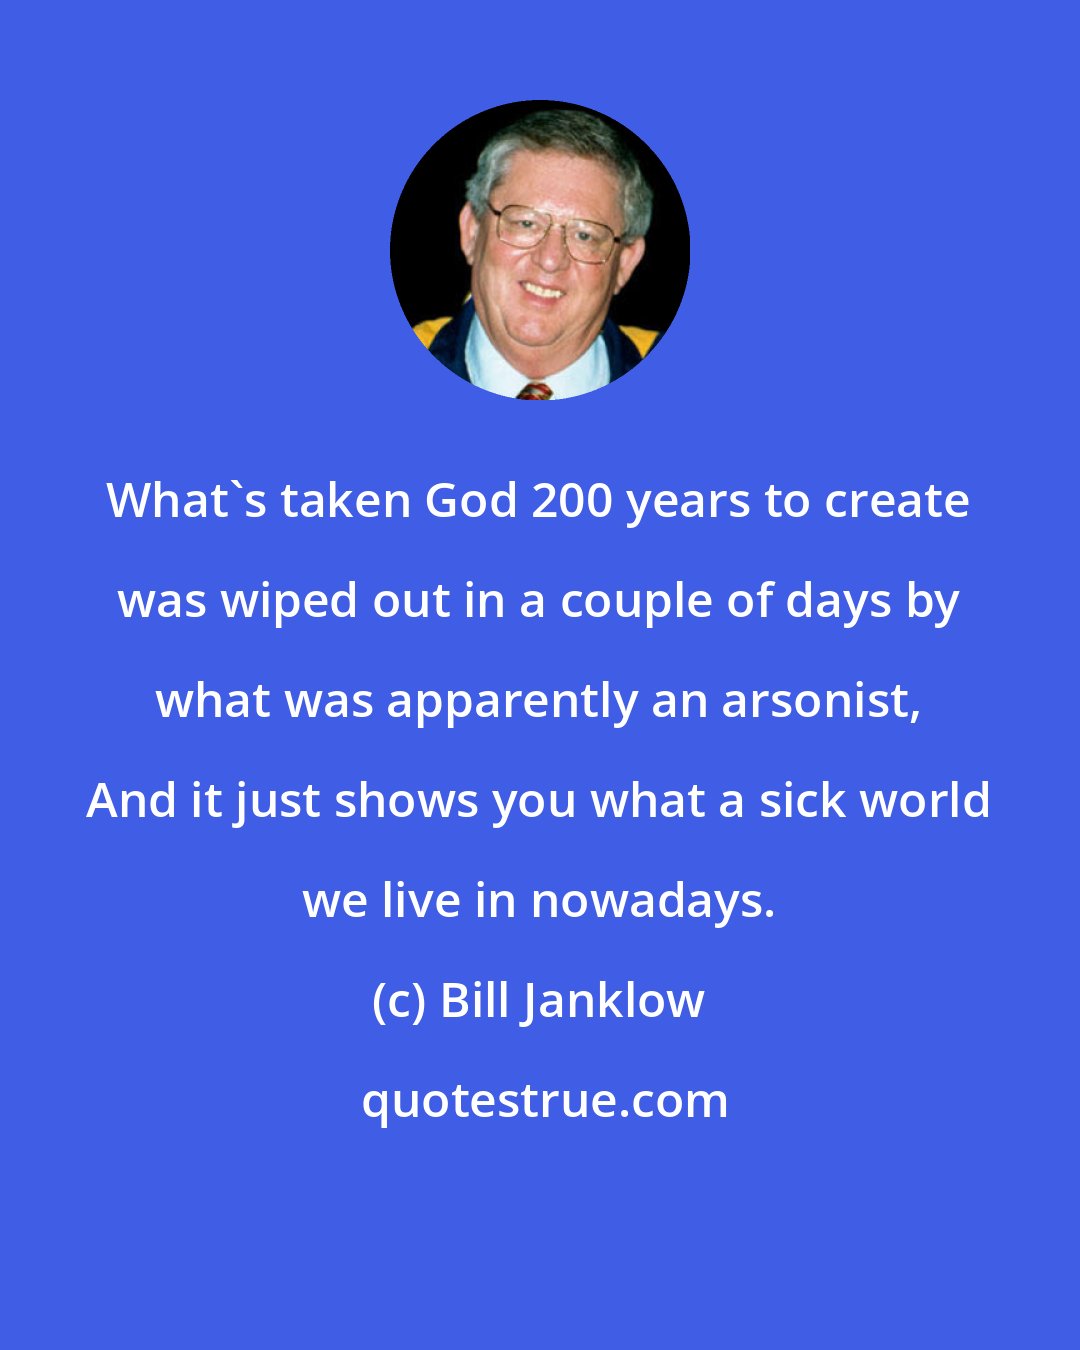 Bill Janklow: What's taken God 200 years to create was wiped out in a couple of days by what was apparently an arsonist, And it just shows you what a sick world we live in nowadays.